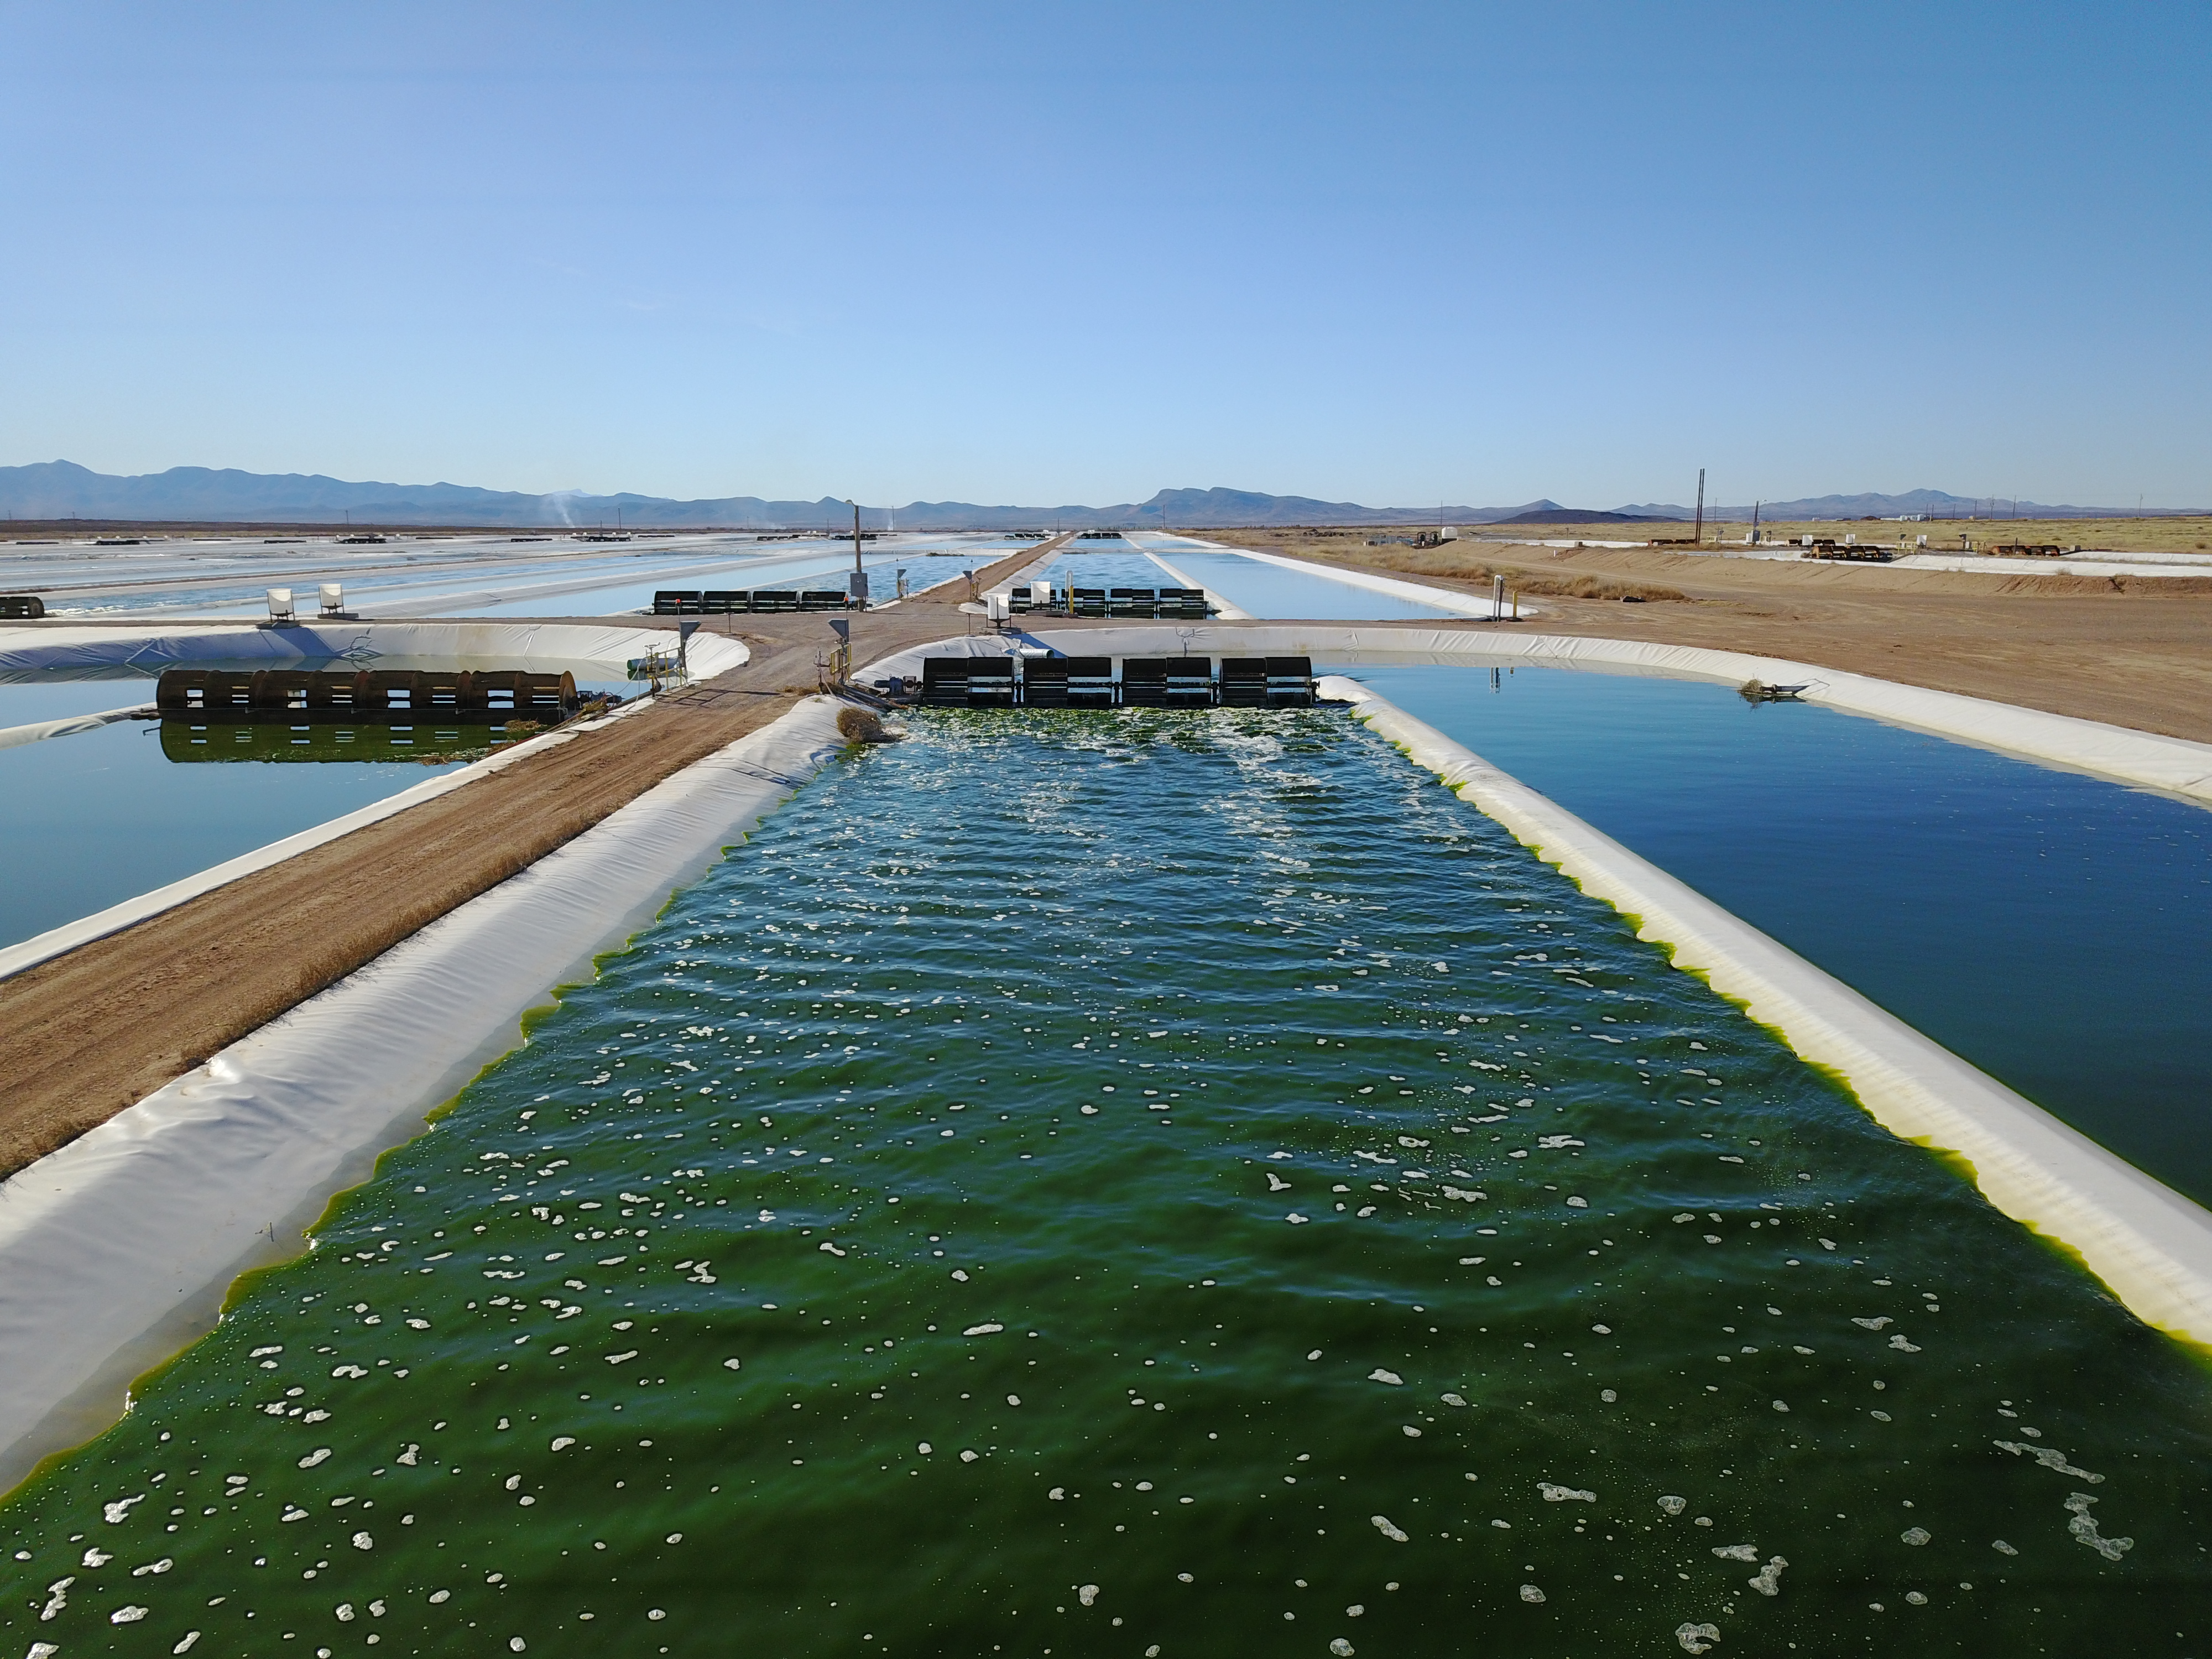 A view of large pools of water used to grow Nannochloropsis, an edible algae. 